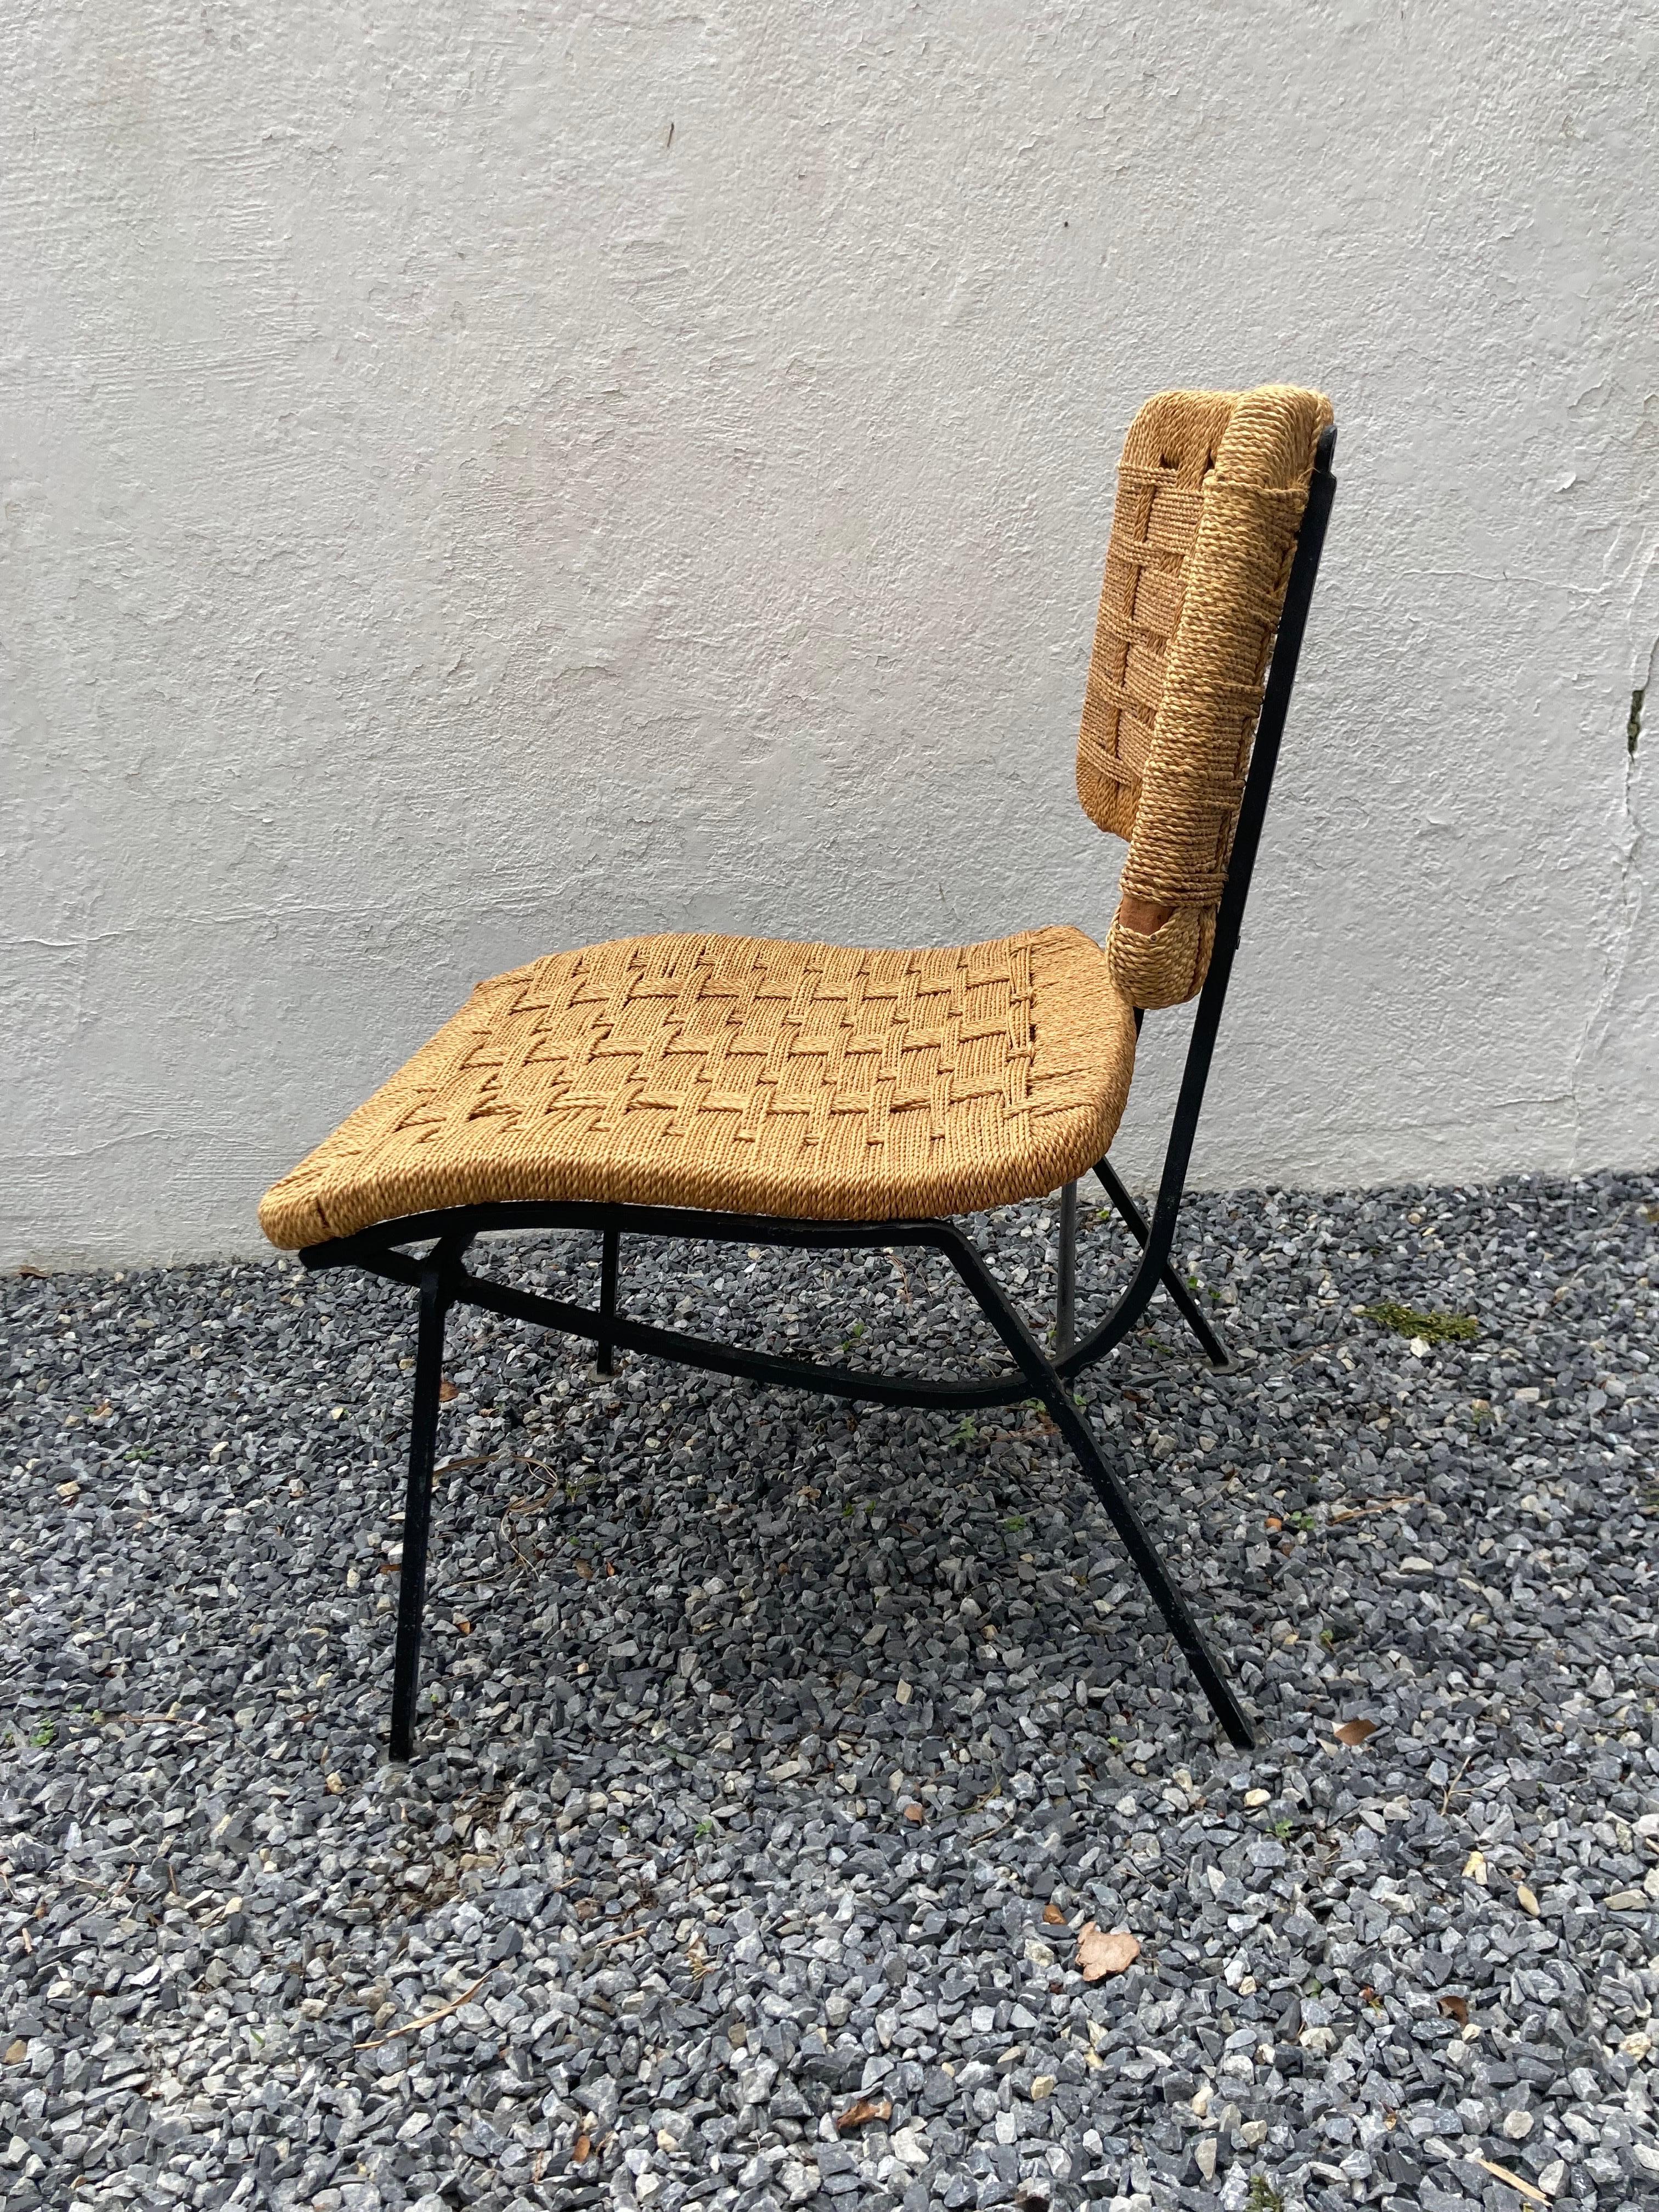 Iron framed chair with woven rope seat and back.